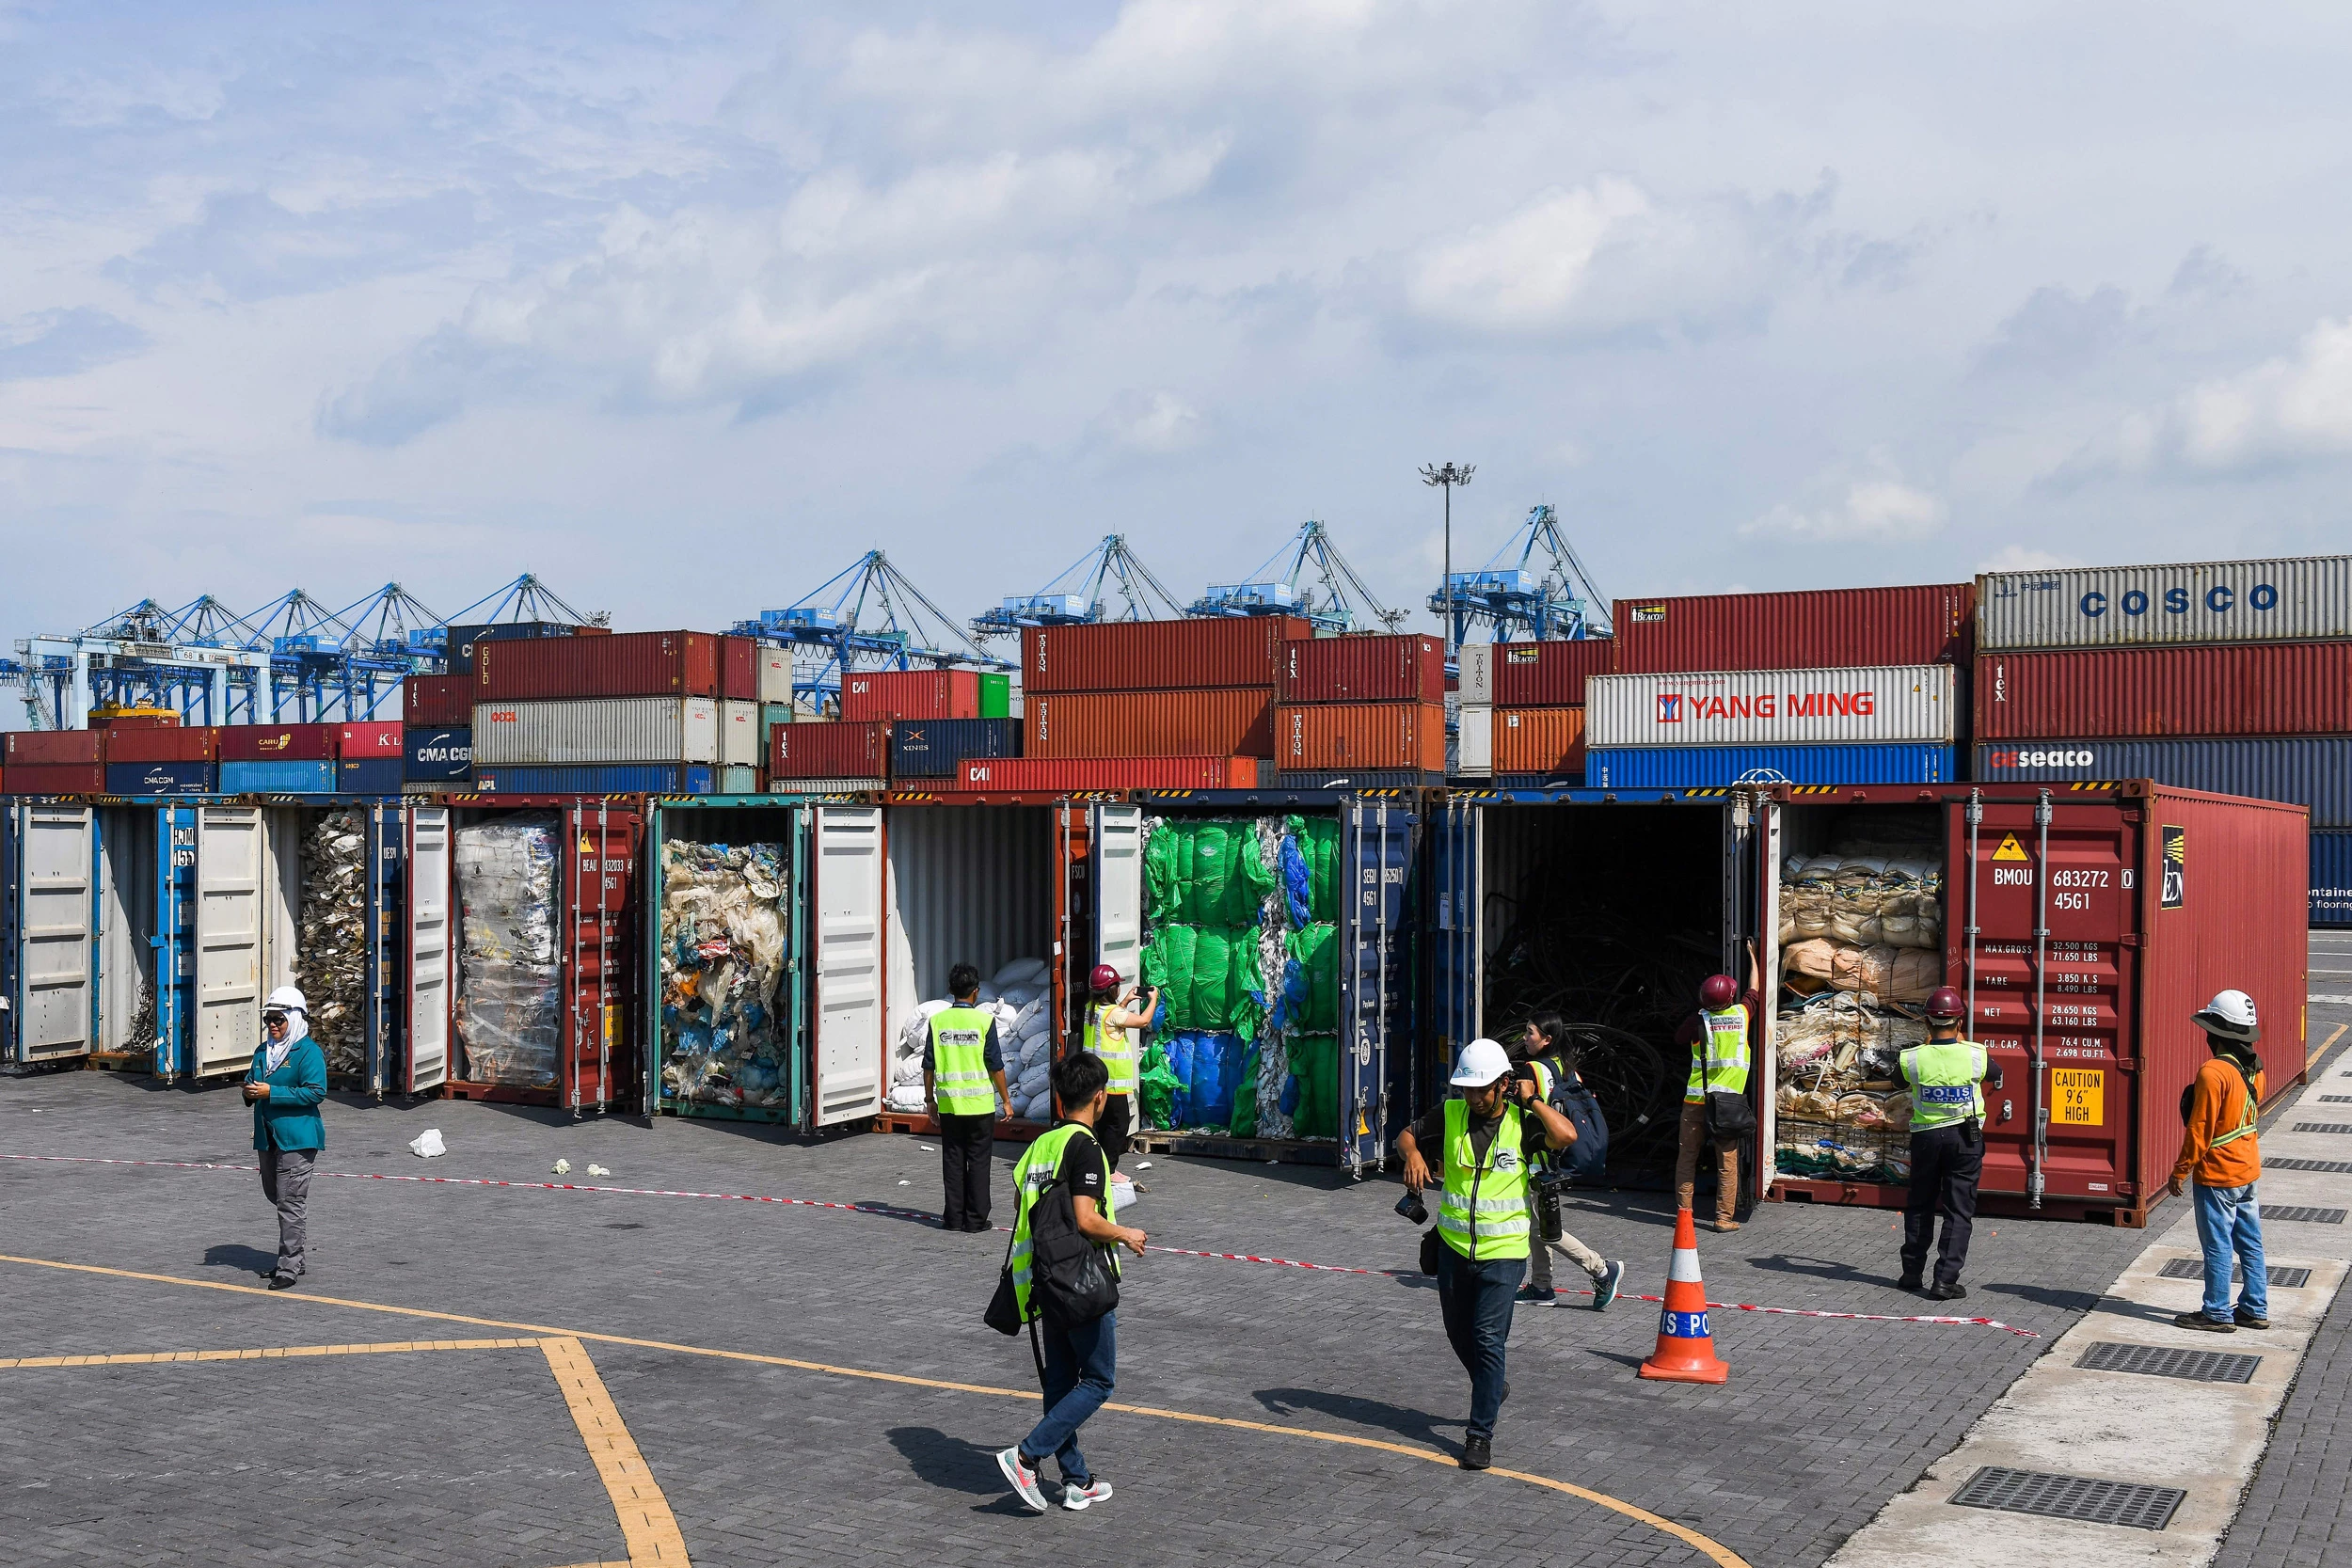 Malaysian officials and journalists inspect containers filled with plastic waste shipment before sending back to the country of origin in Port Klang, west of Kuala Lumpur on May 28, 2019. (Photo by Mohd RASFAN / AFP)        (Photo credit should read MOHD RASFAN/AFP via Getty Images)